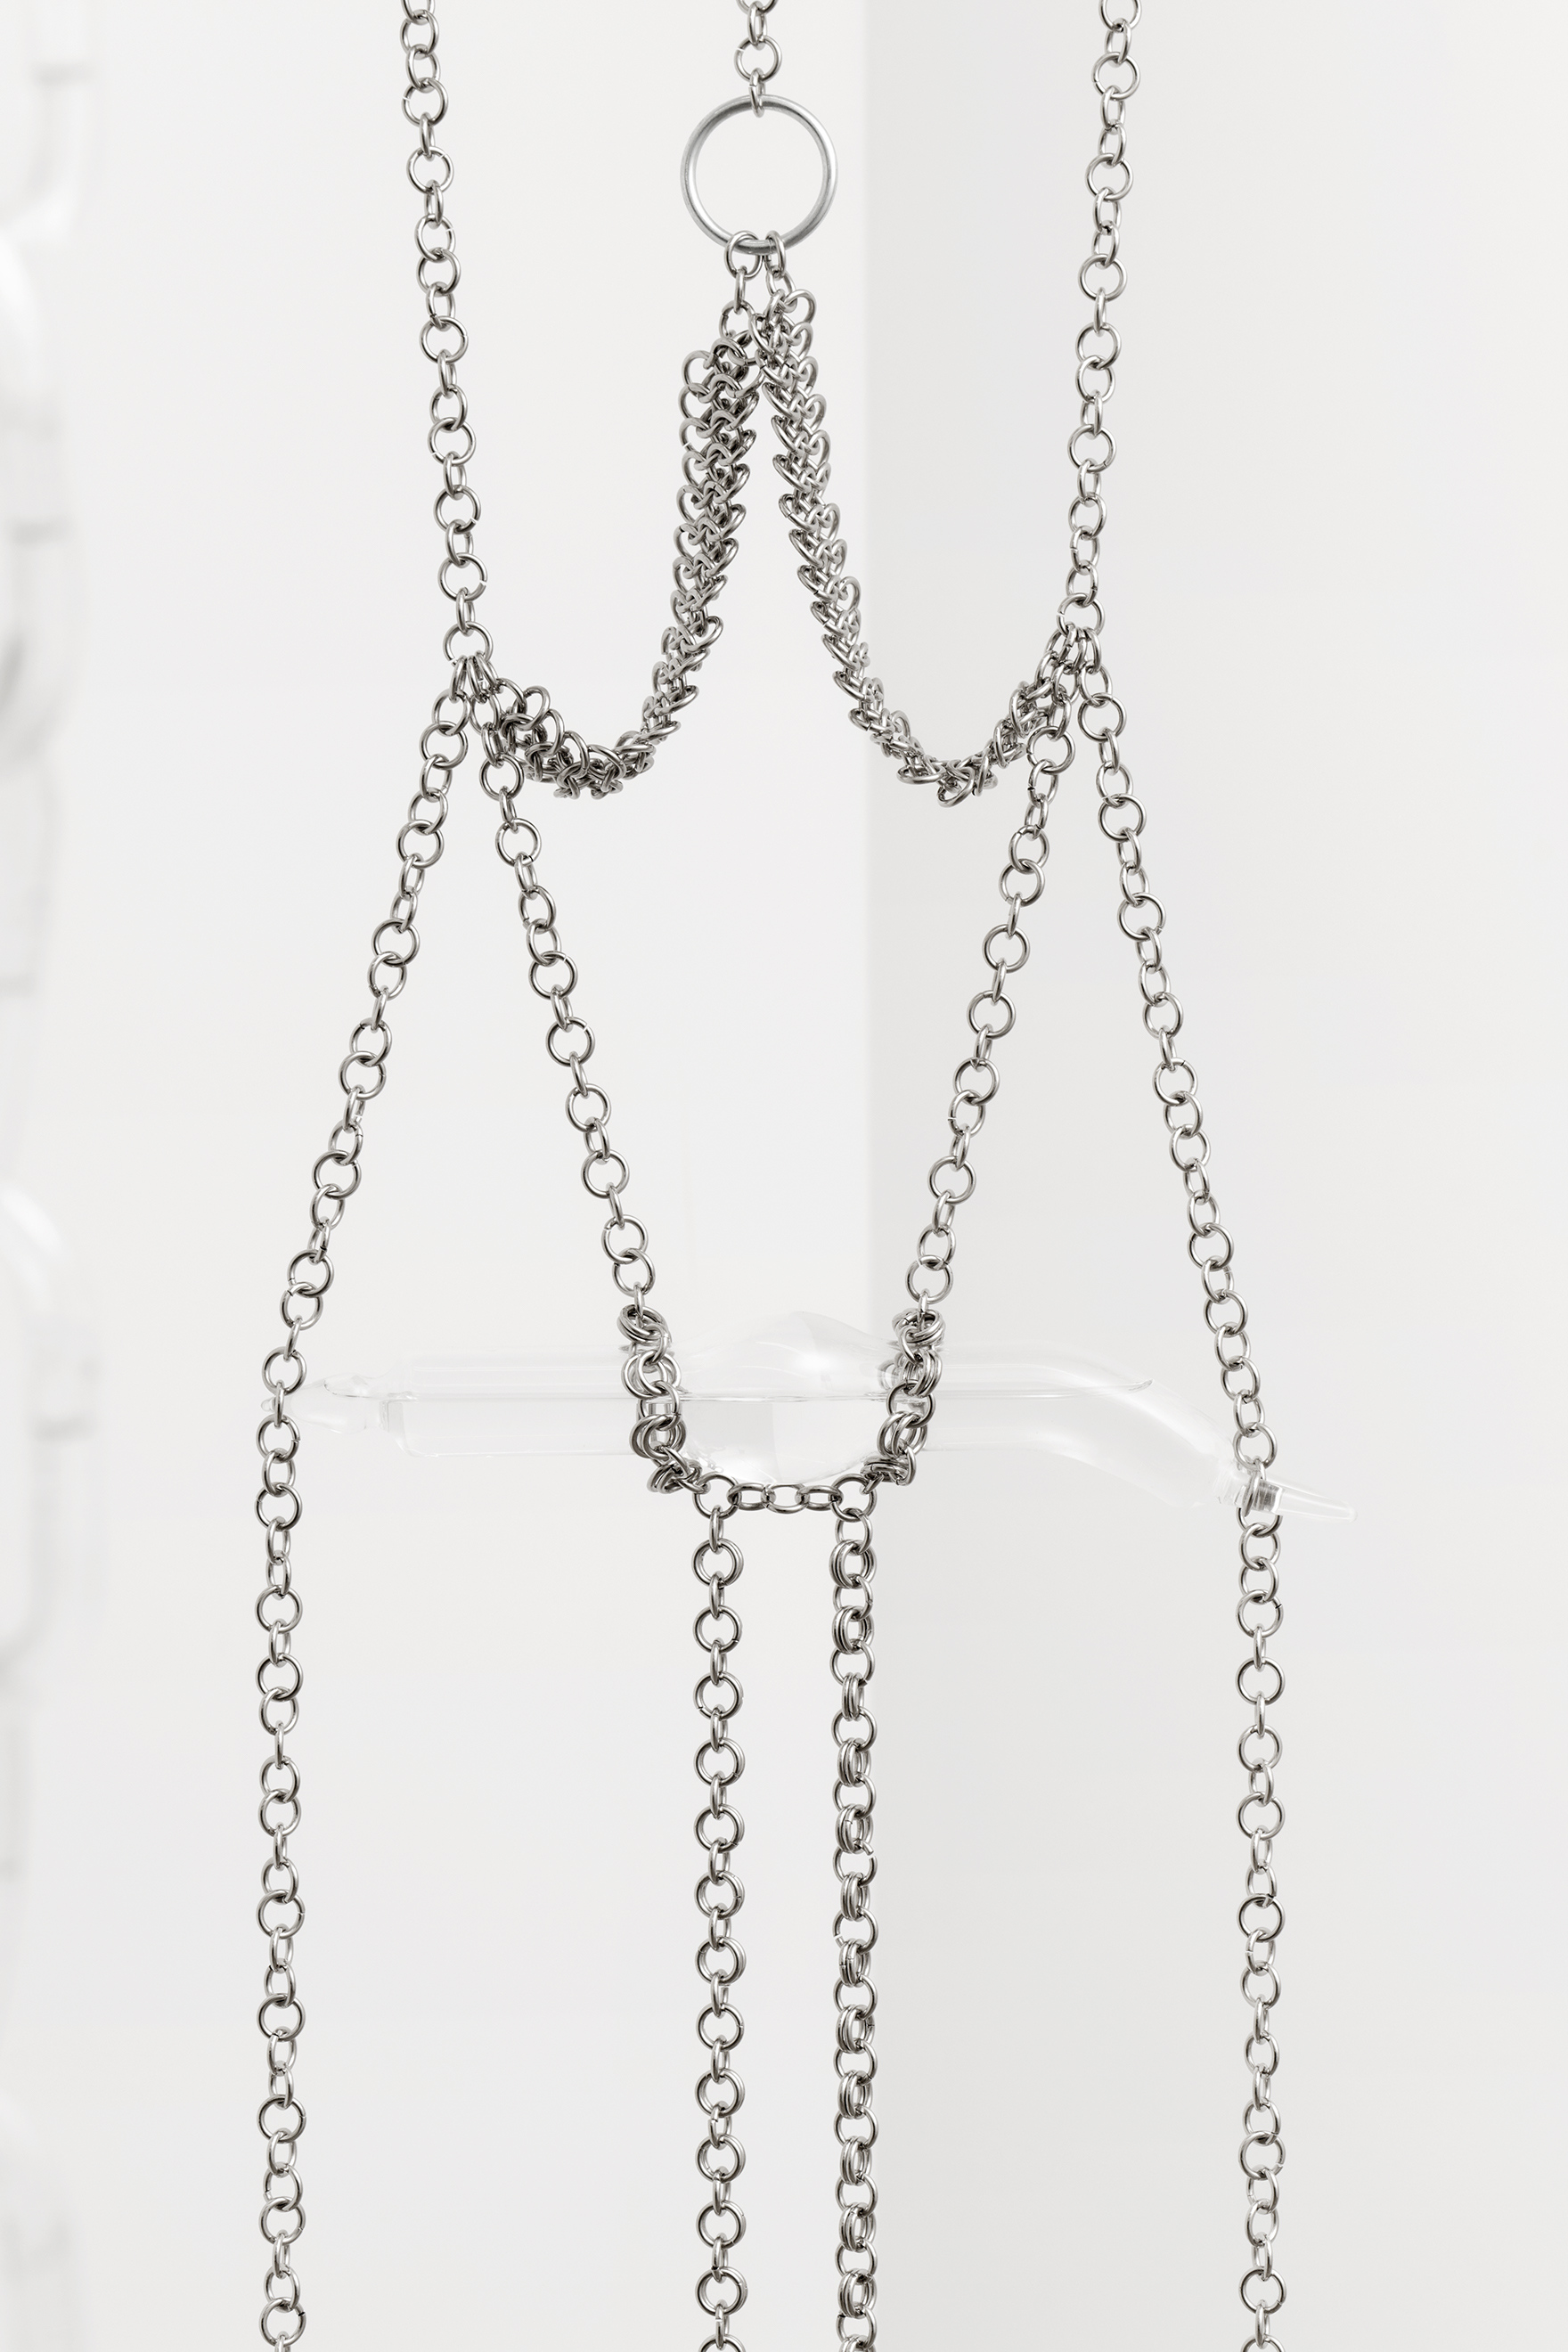 Andreia Santana, Wet Toy, 2022, water, glass and chain mail, 256 x 35 x 7 cm, unique